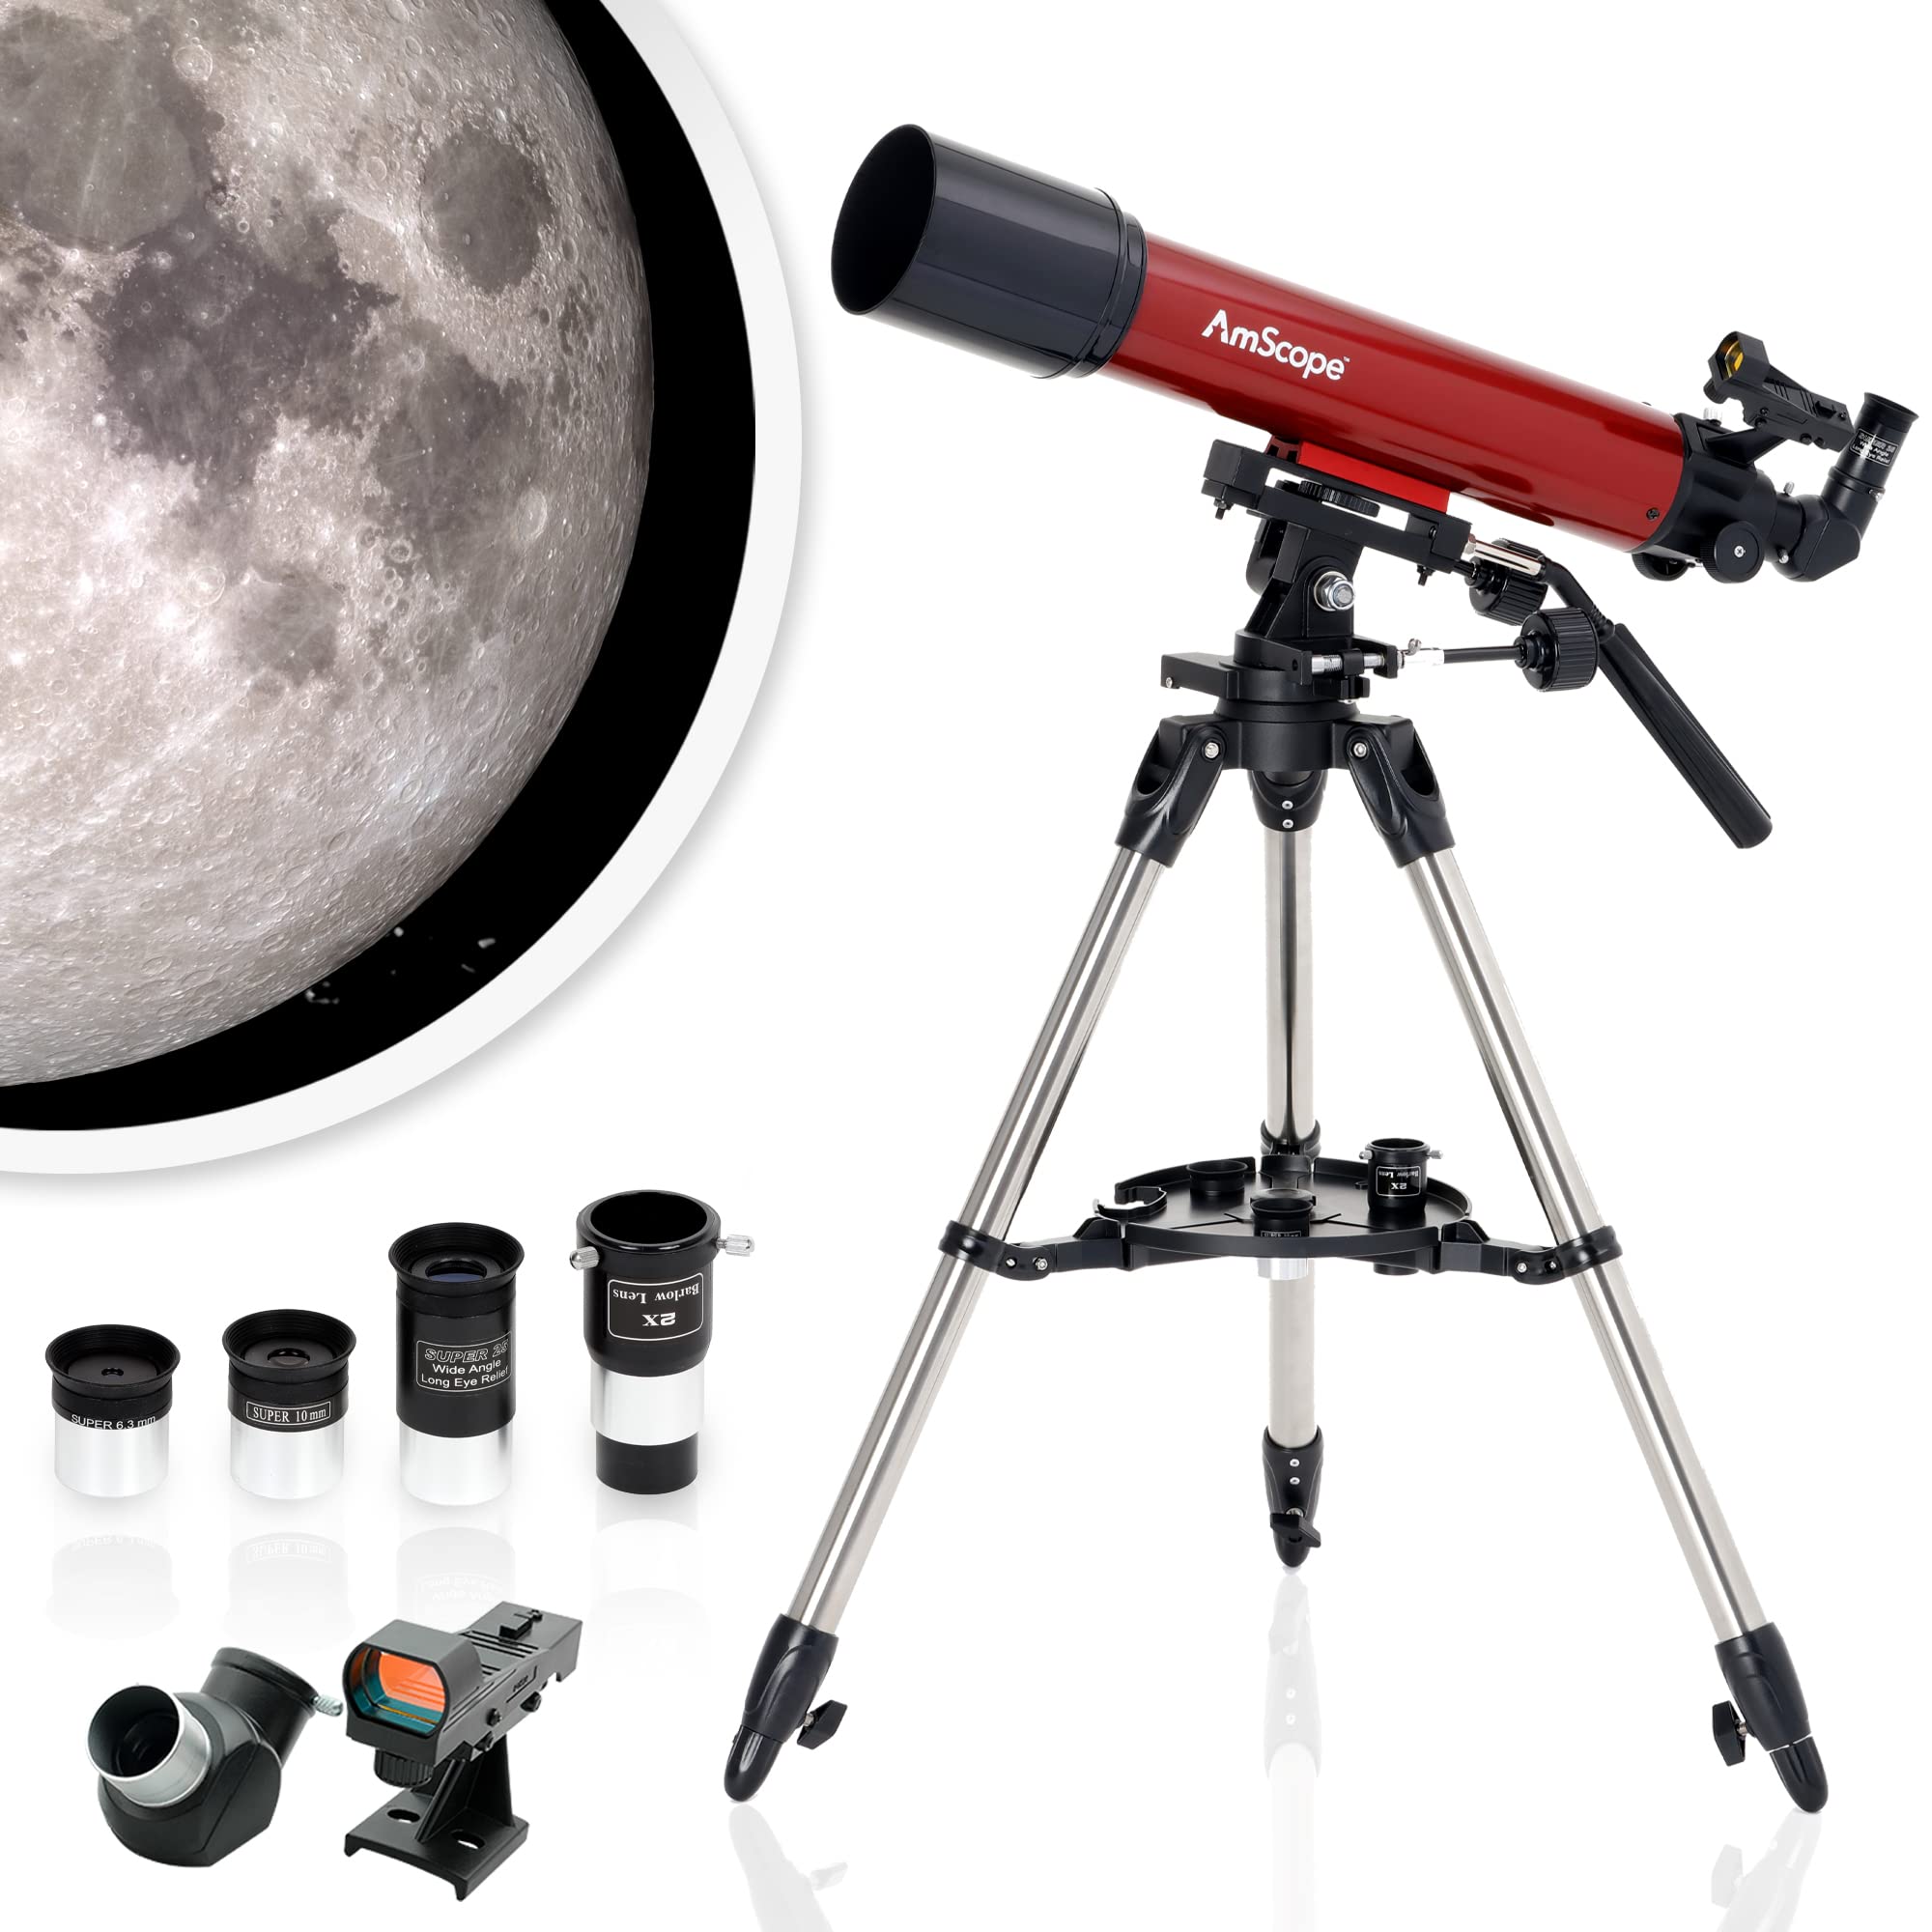 AmScope Refractor ALT-AZ Telescope with Altitude Azimuth Mount, 102mm Aperture, 600mm Focal Length, Stainless Steel Tripod and R